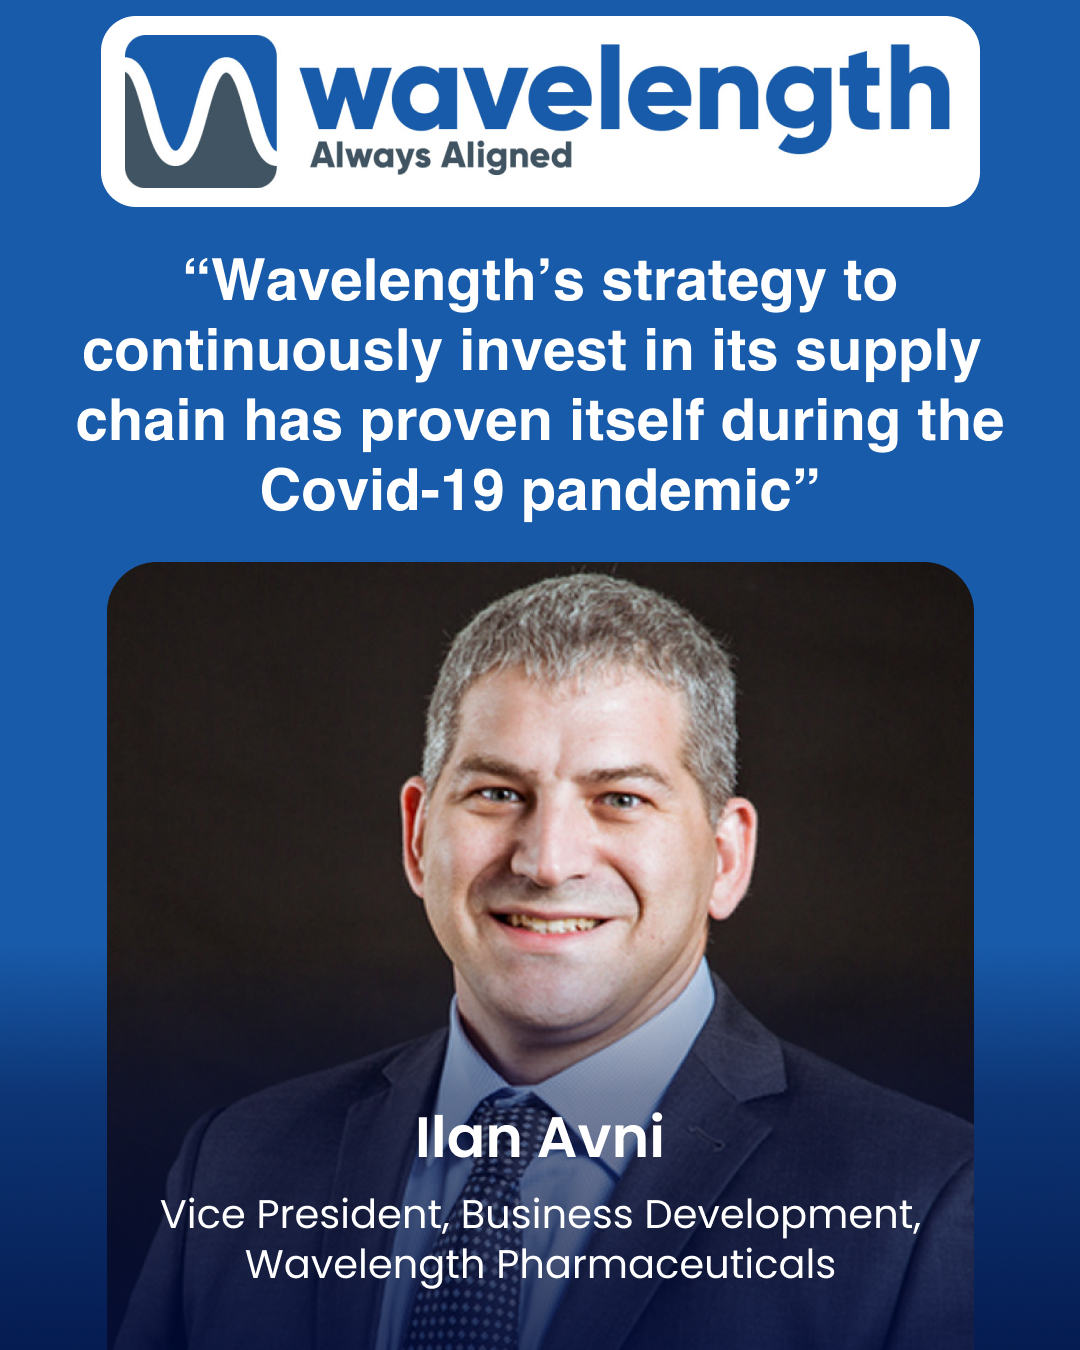 “Wavelength’s strategy to continuously invest in its supply chain has proven itself during the Covid-19 pandemic”